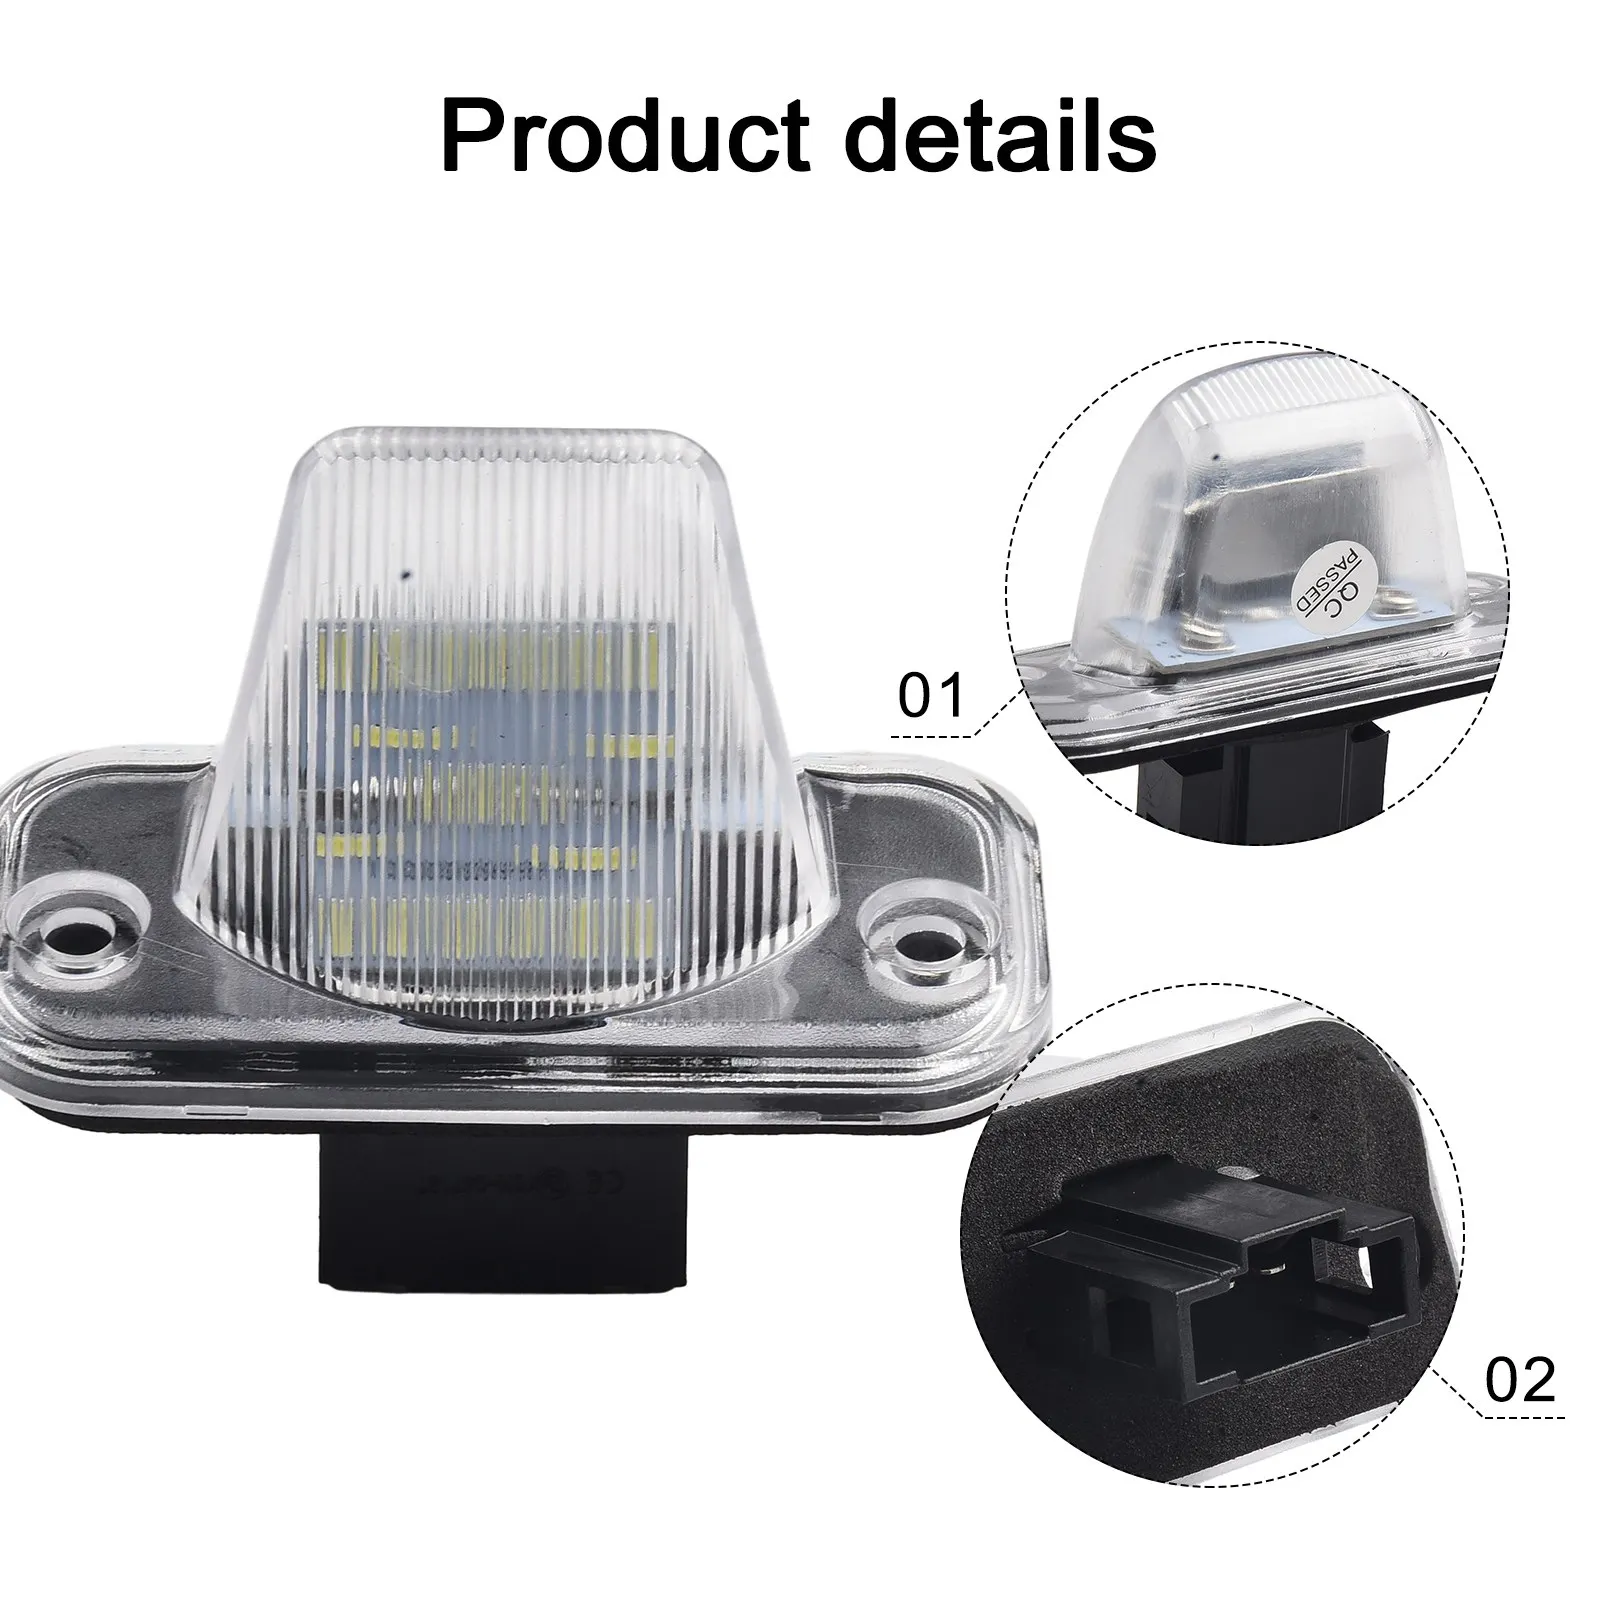 

High-Intensity Plug And Play 50000Hours Plate Light For T4 License Lamp Plate Lamp 2x License Lights 1990-2003 3000K ABS+LED